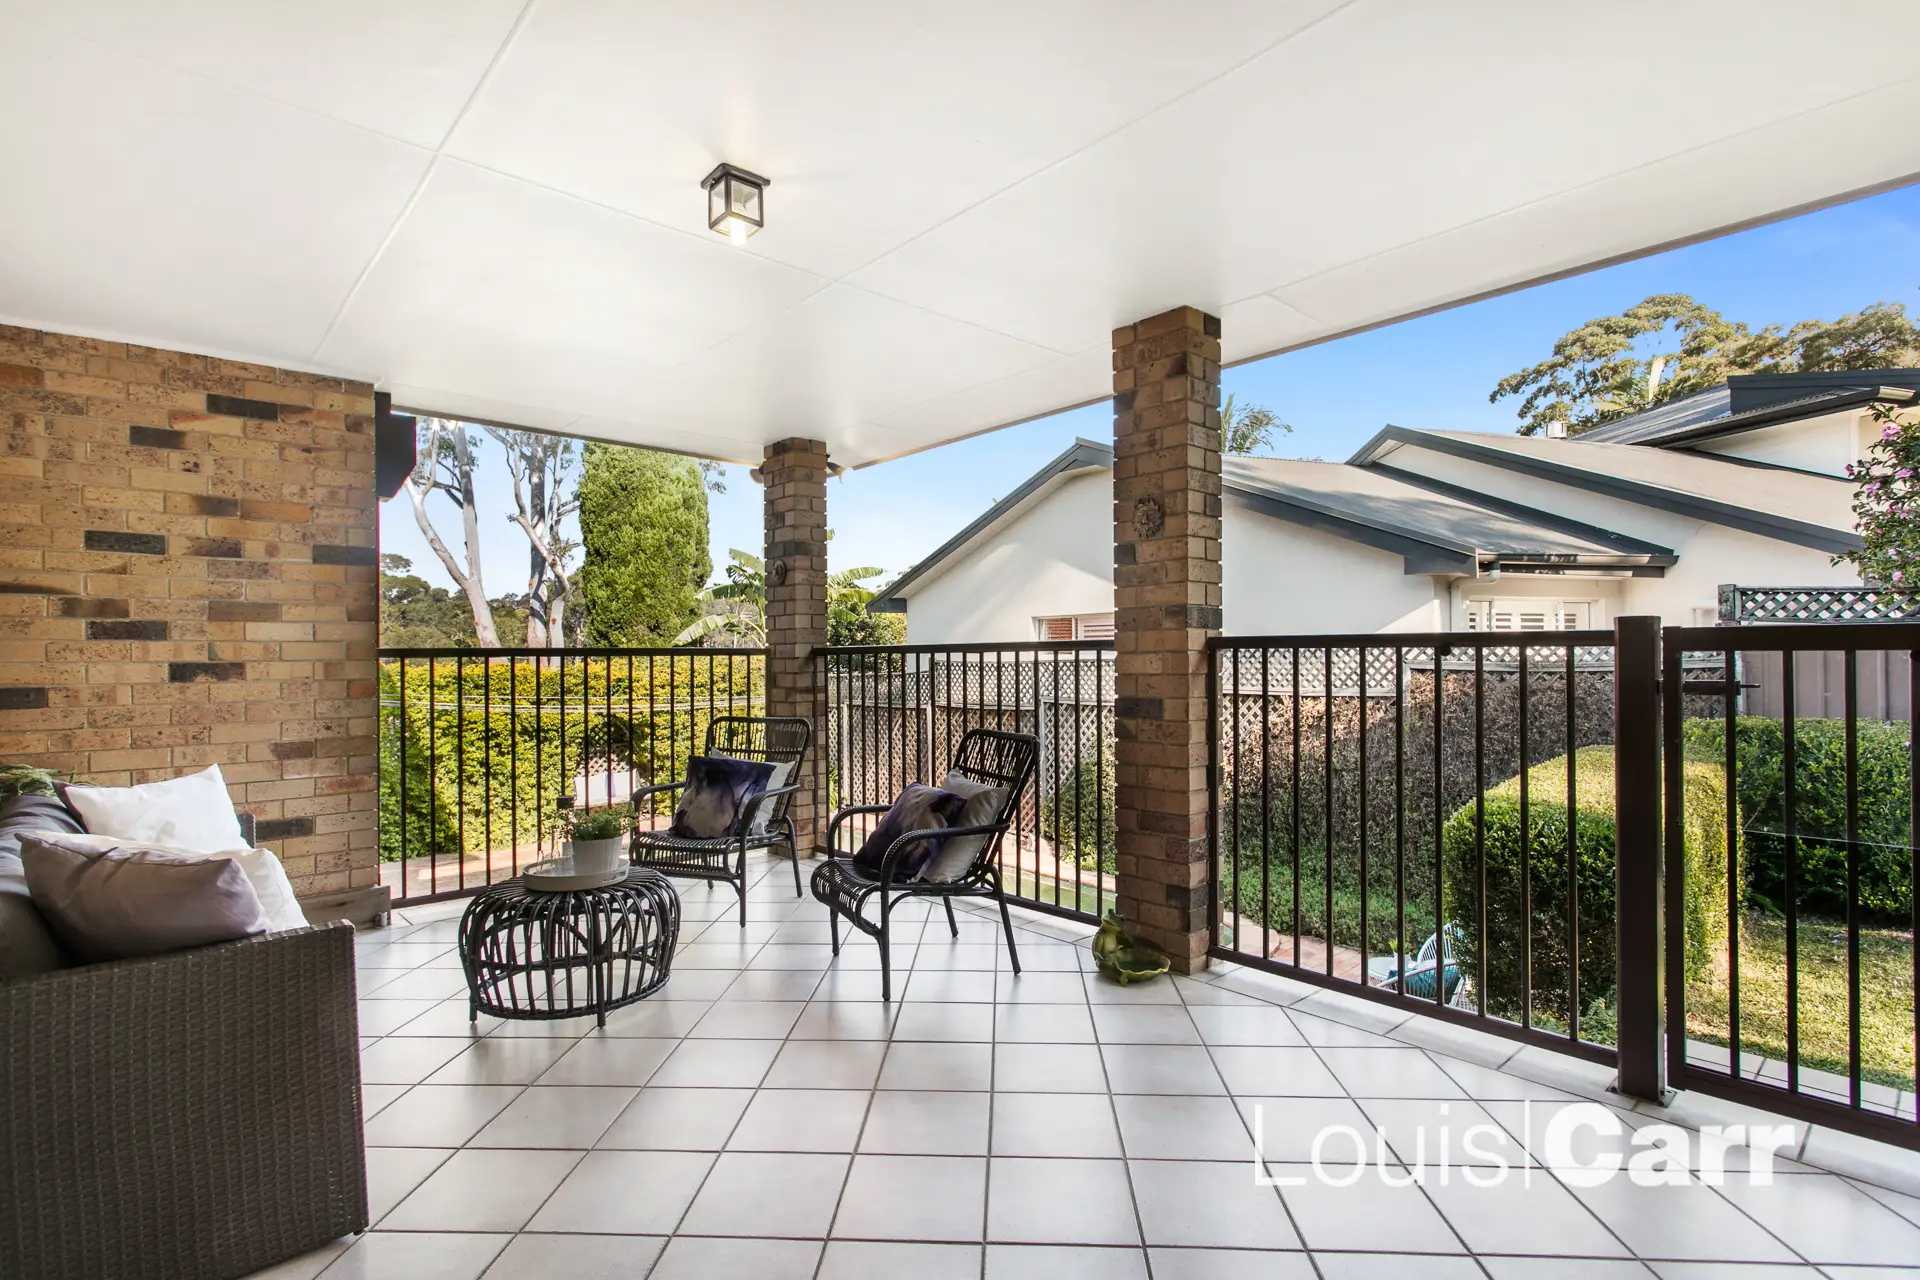 Photo #8: 33 Casuarina Drive, Cherrybrook - Sold by Louis Carr Real Estate